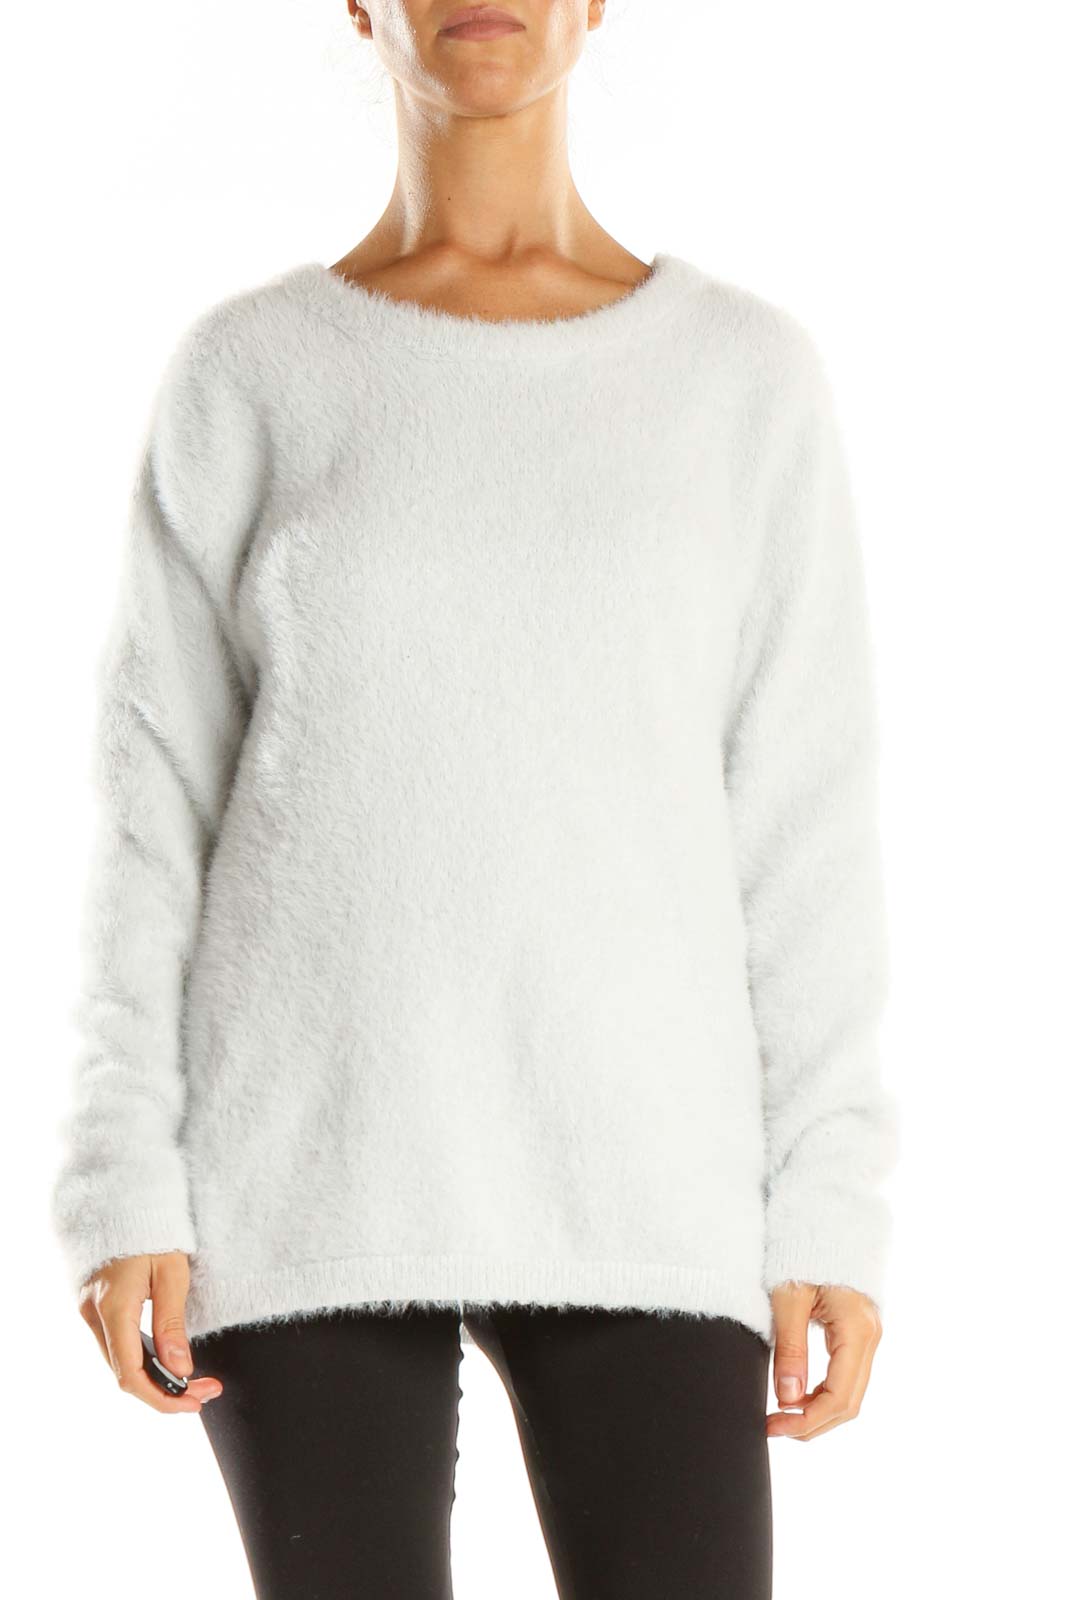 White Solid Classic Sweater Front